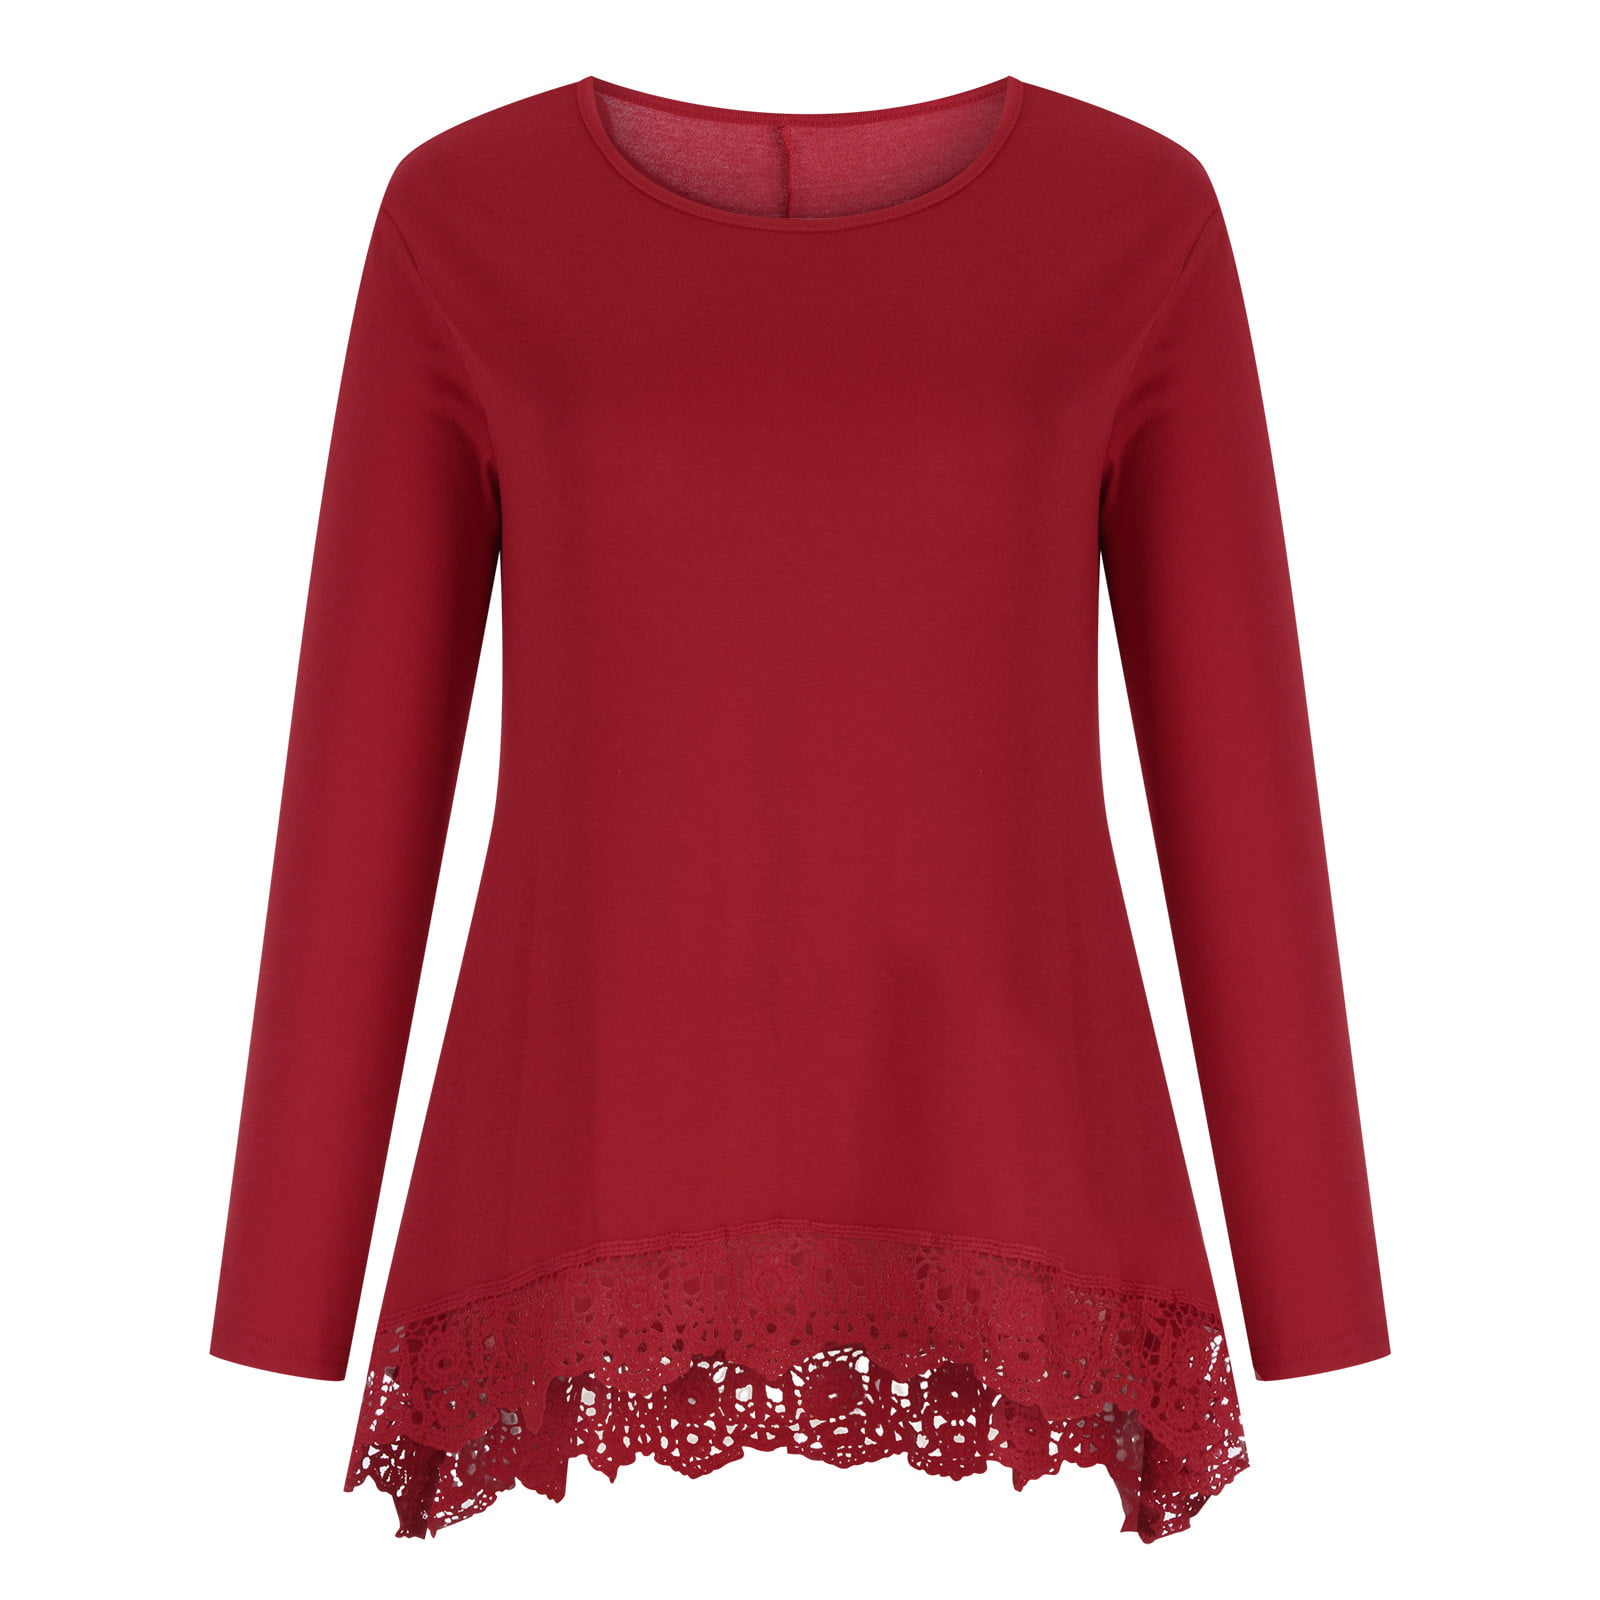 Well T-shirt Long Sleeve Lace Trim O-Neck A-Line Tunic Tops High-Low Hem  Asymmetrical Hem Lines Shirts Loose Casual Women's Tops wine red 